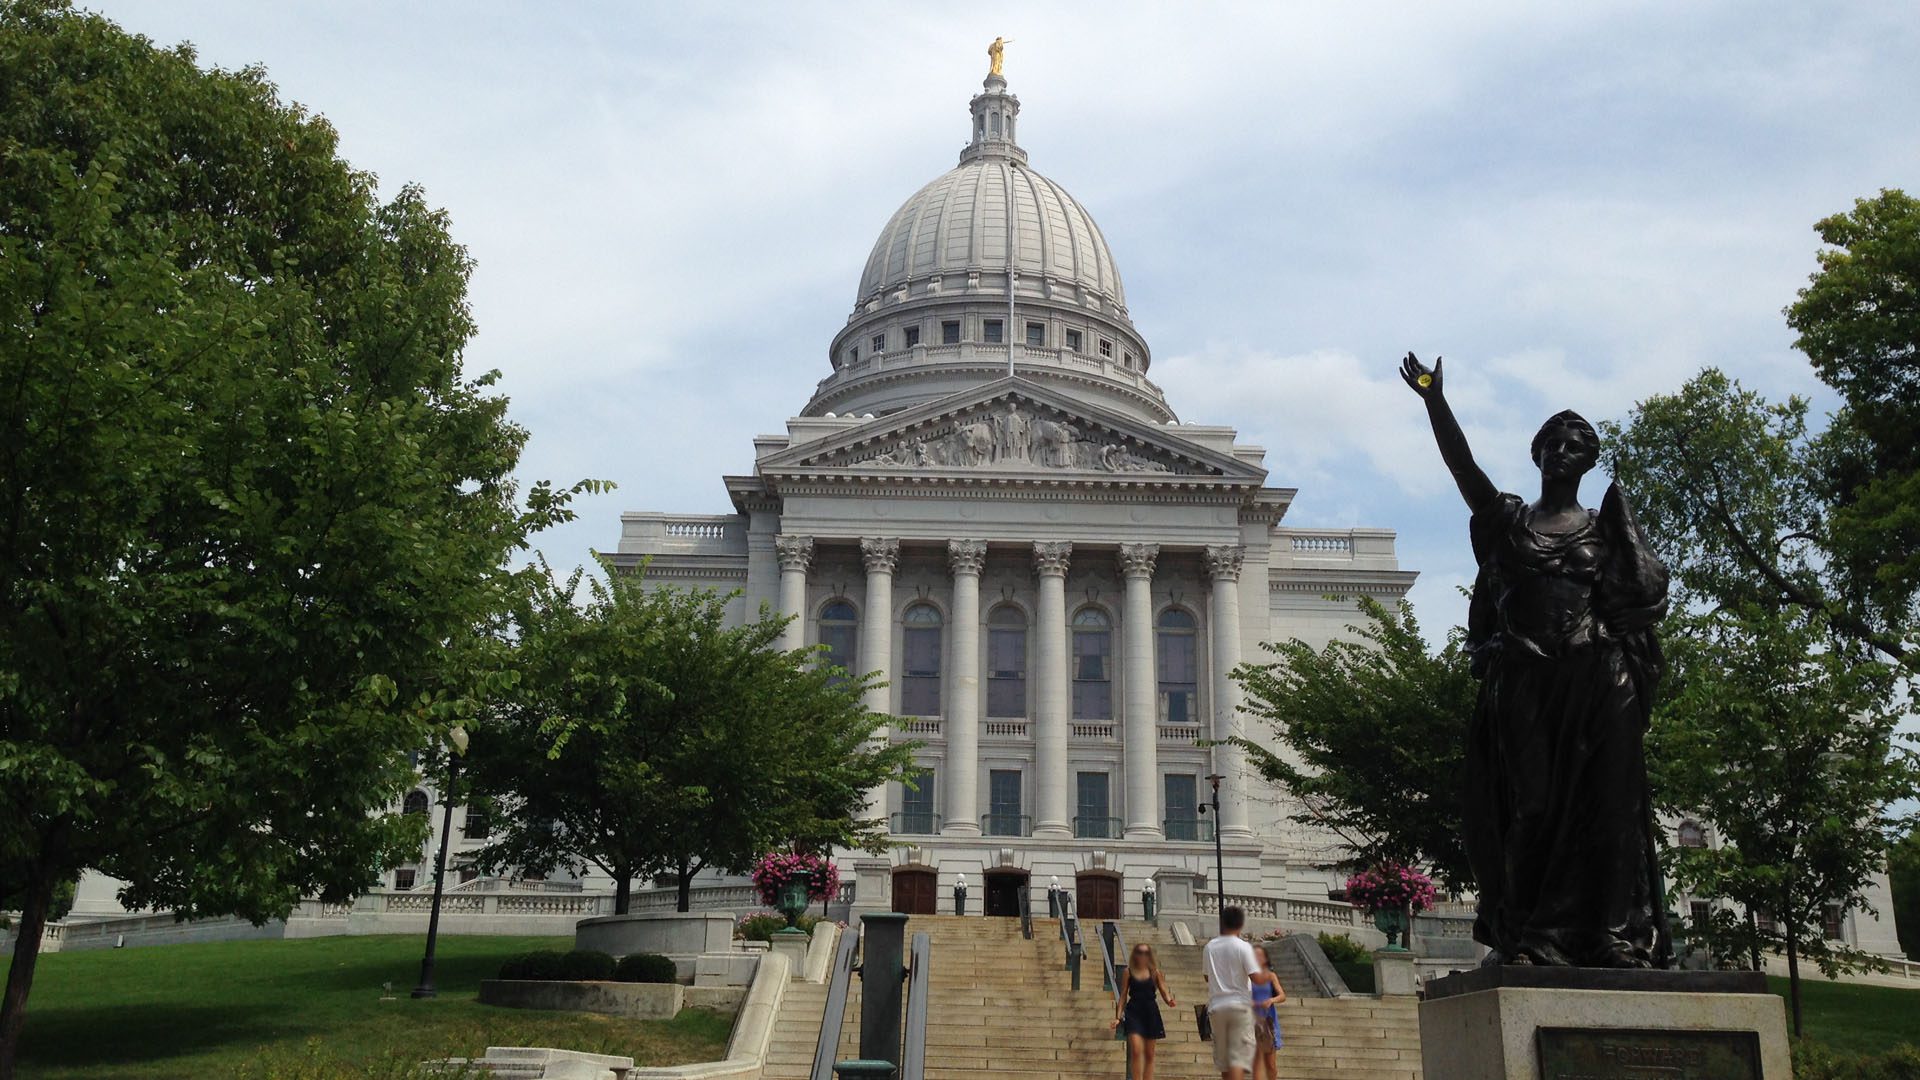 View of the Wisconsin State Capitol from below the steps.